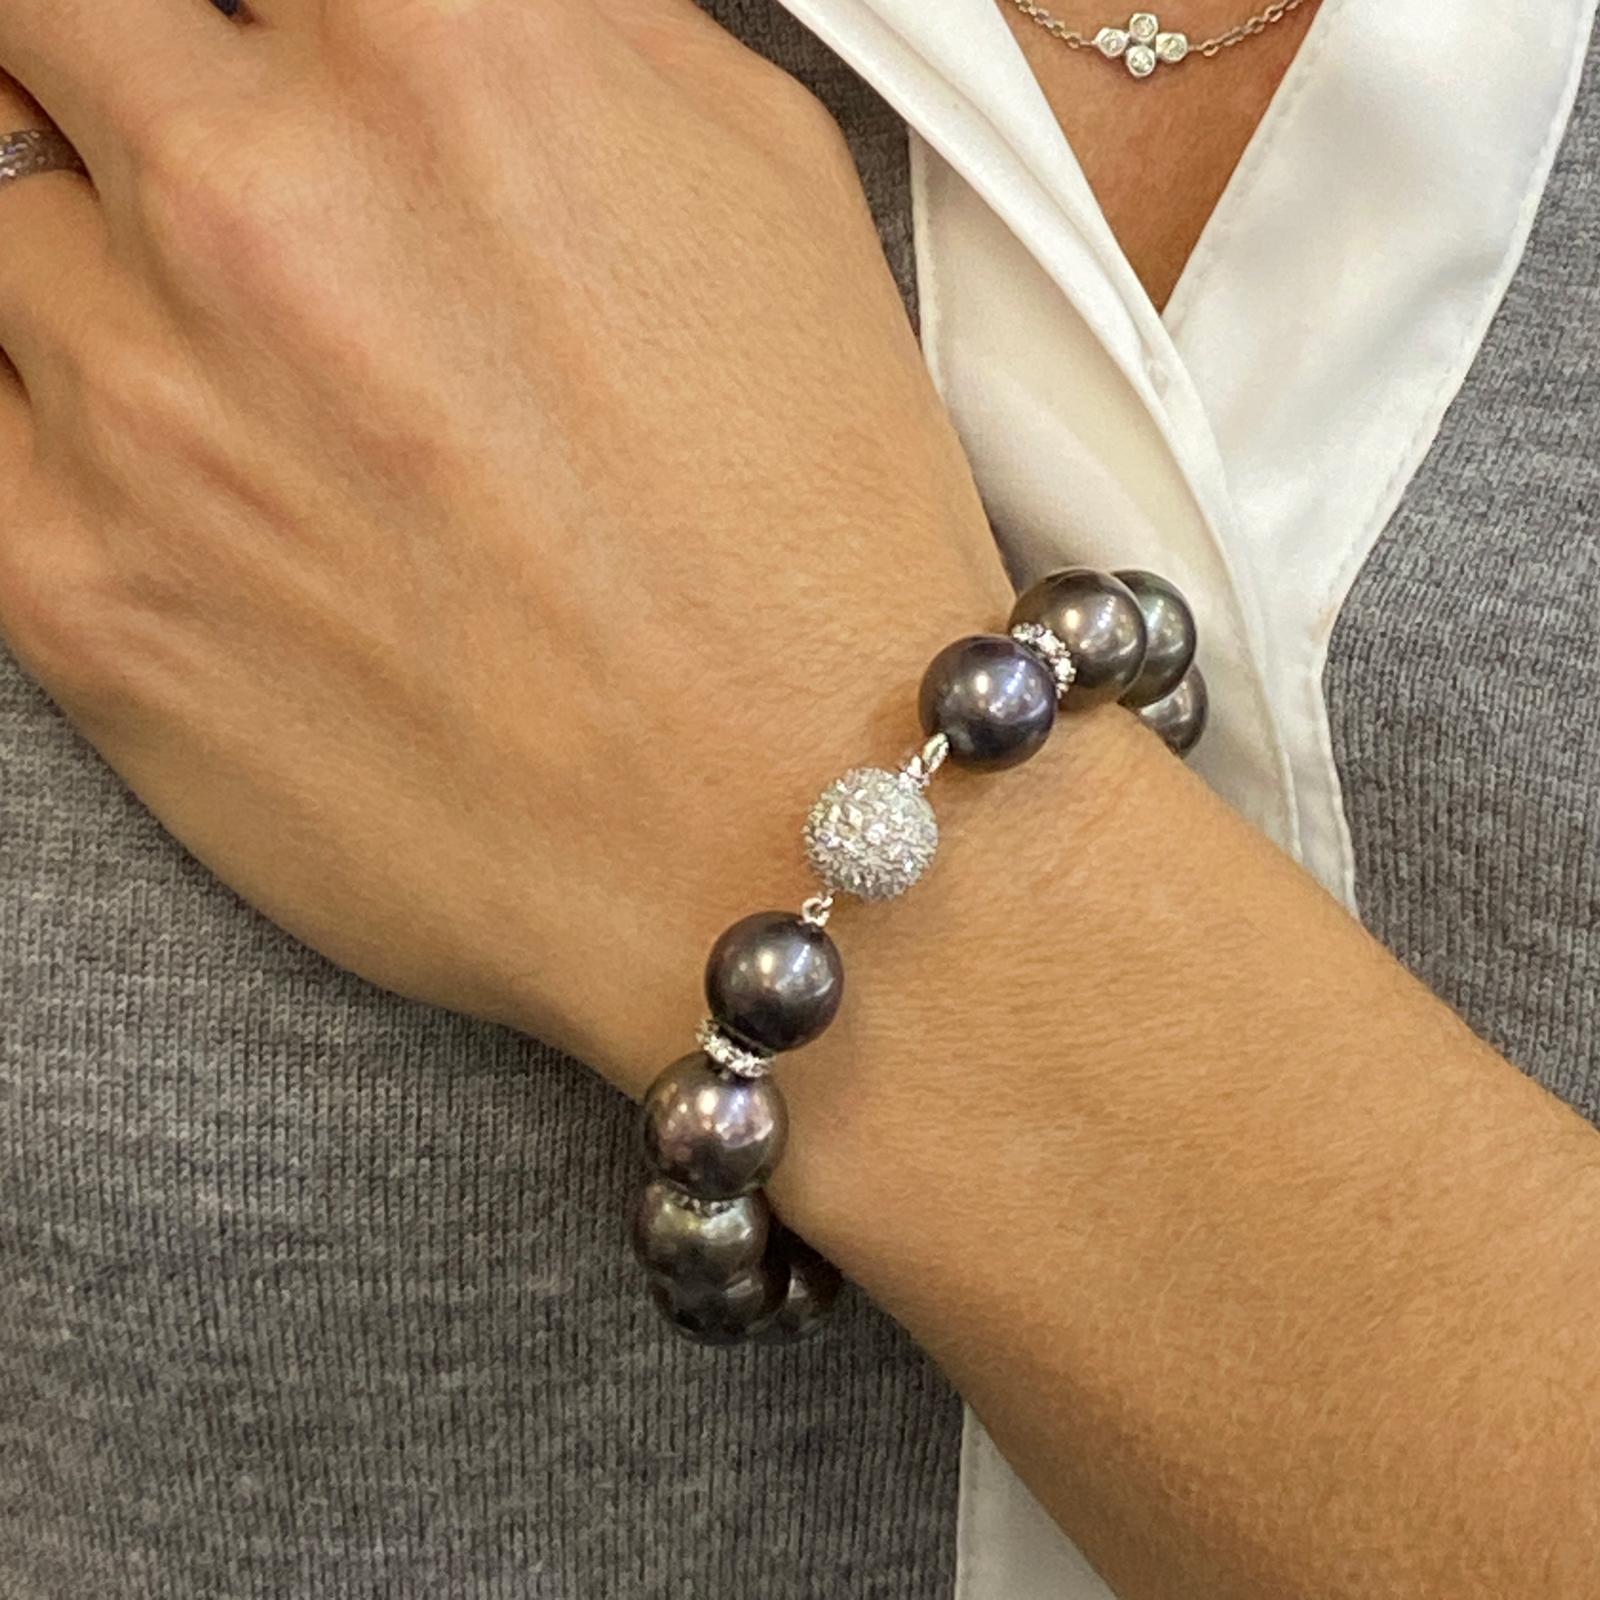 Tahitian pearl and diamond bracelet fashioned in platinum. The bracelet features 12-12.5 mm beautifully matched Tahitian pearls with diamond rhondels and diamonds clasp. The diamonds weigh approximately 3.88 carat total weight. The bracelet measures